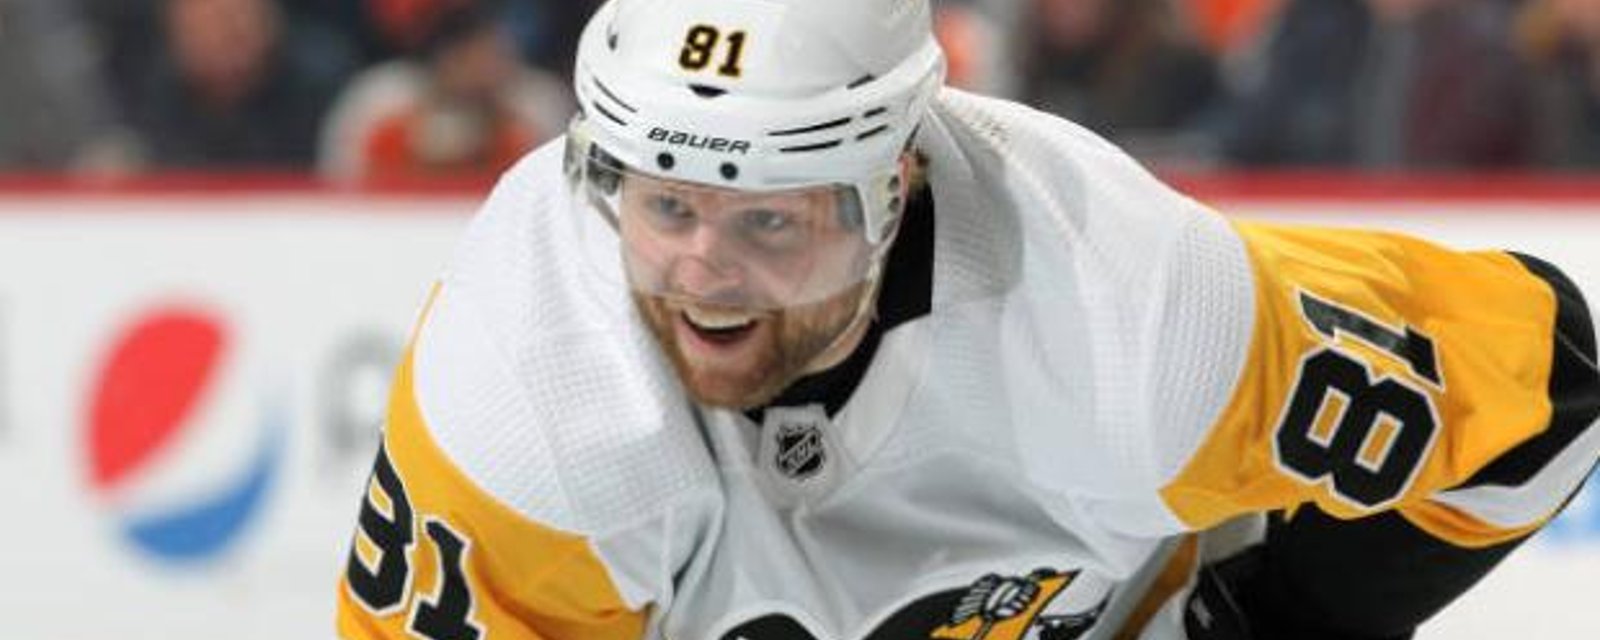 Another option on the table for Kessel 